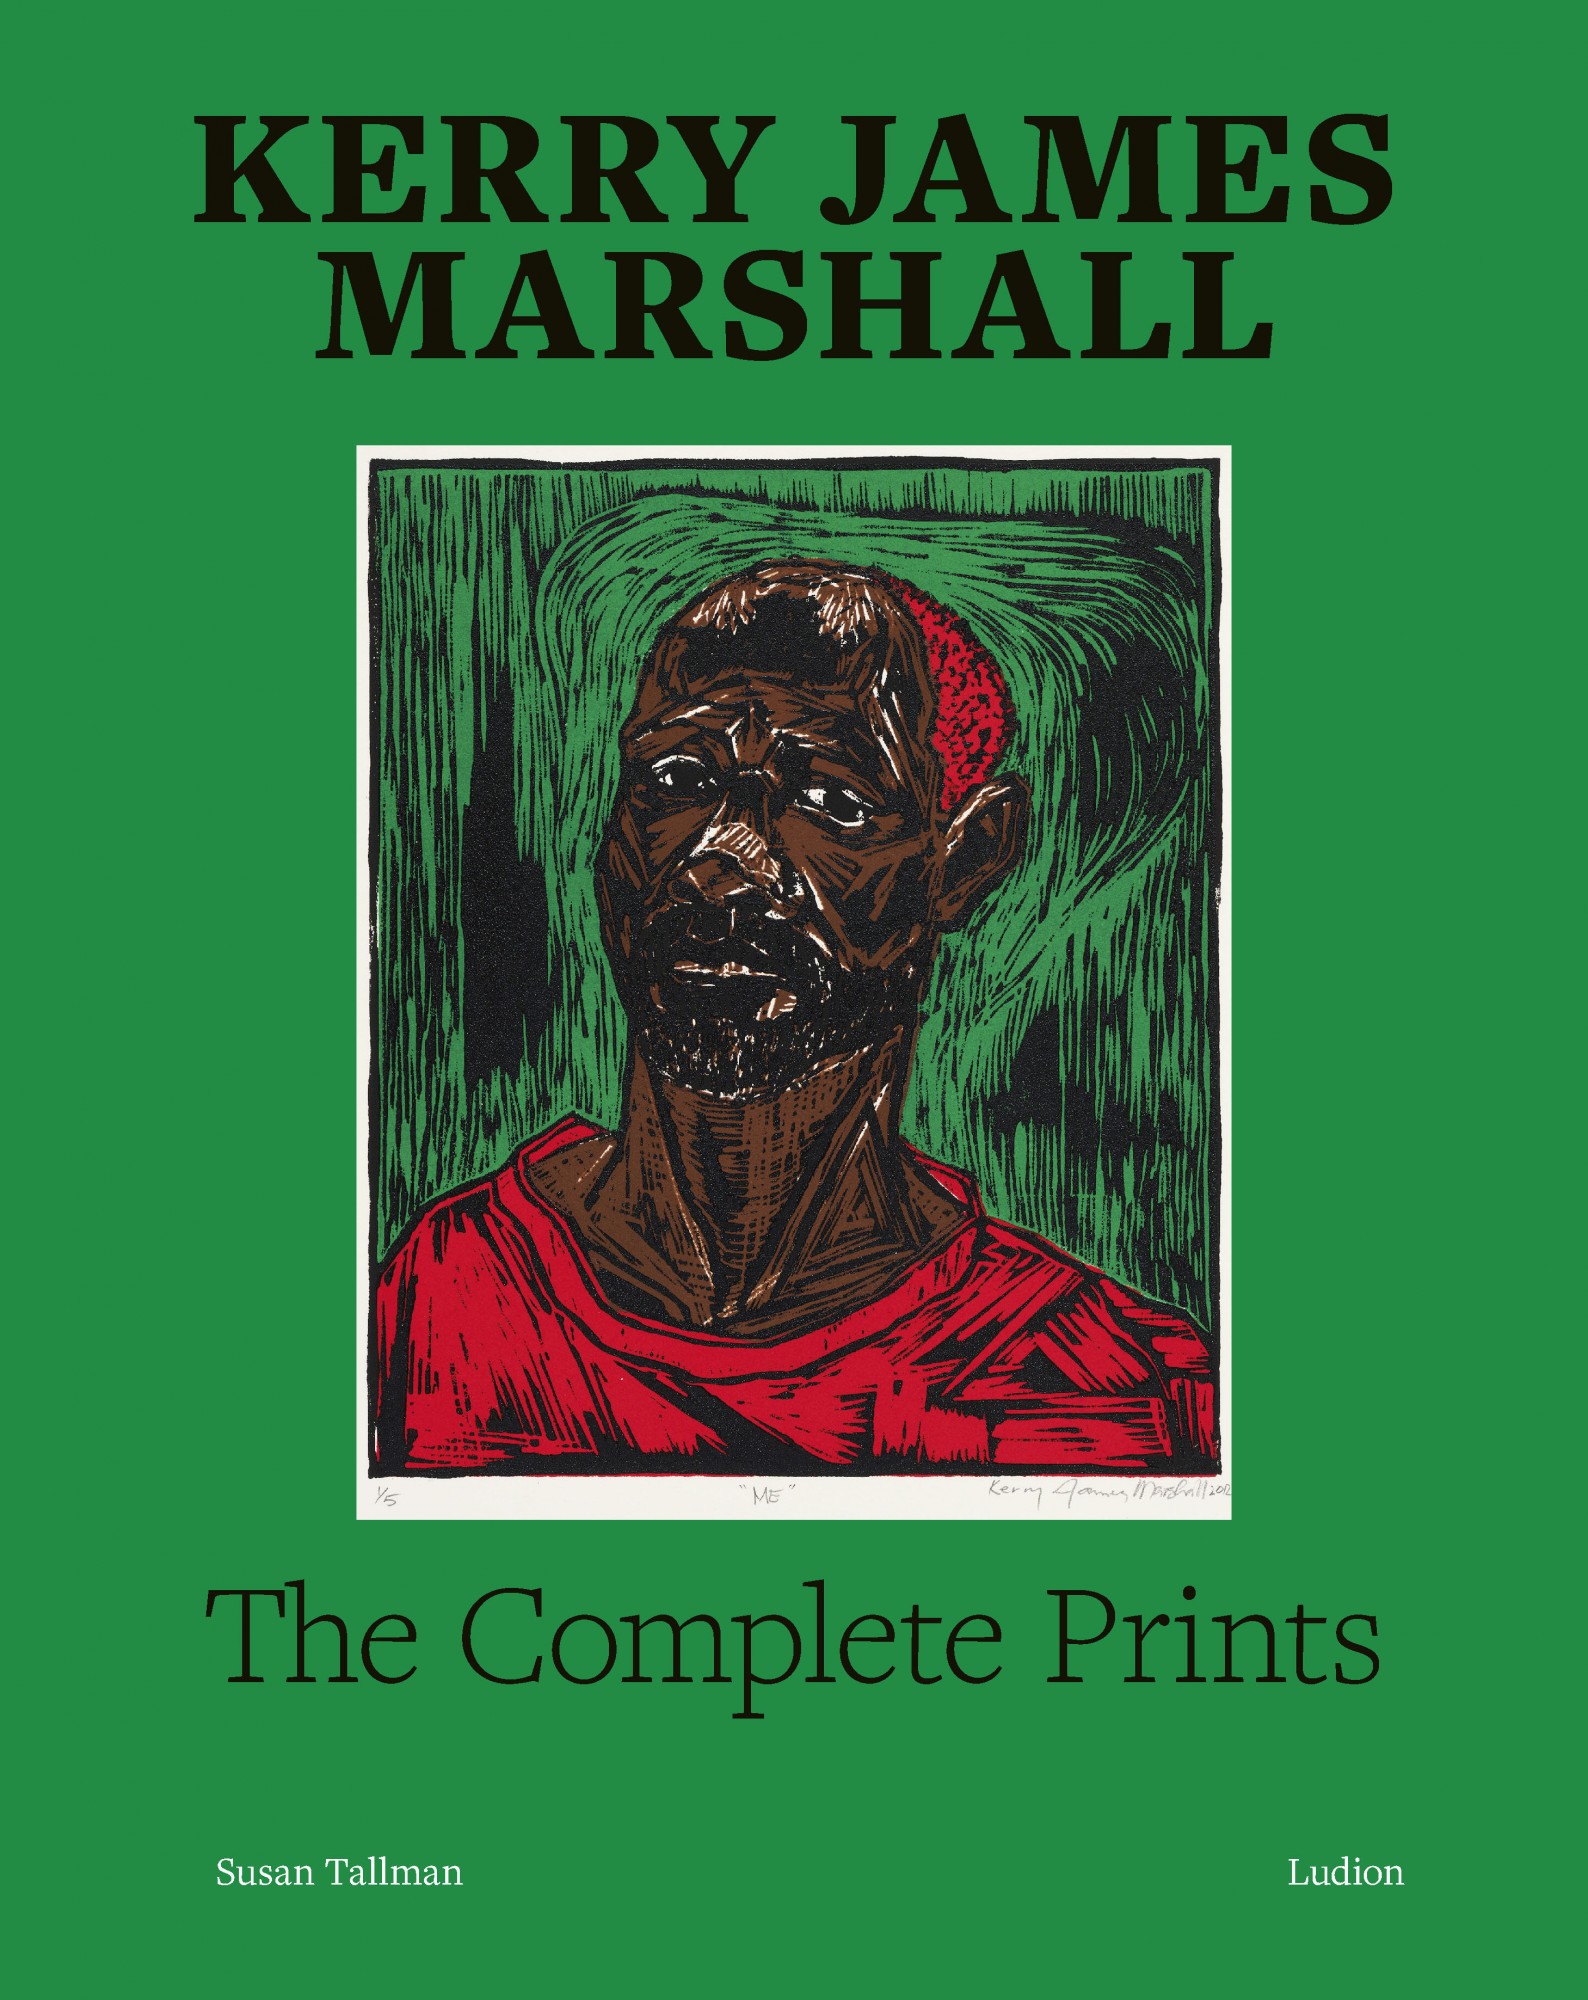 Kerry James Marshall – The Complete Prints